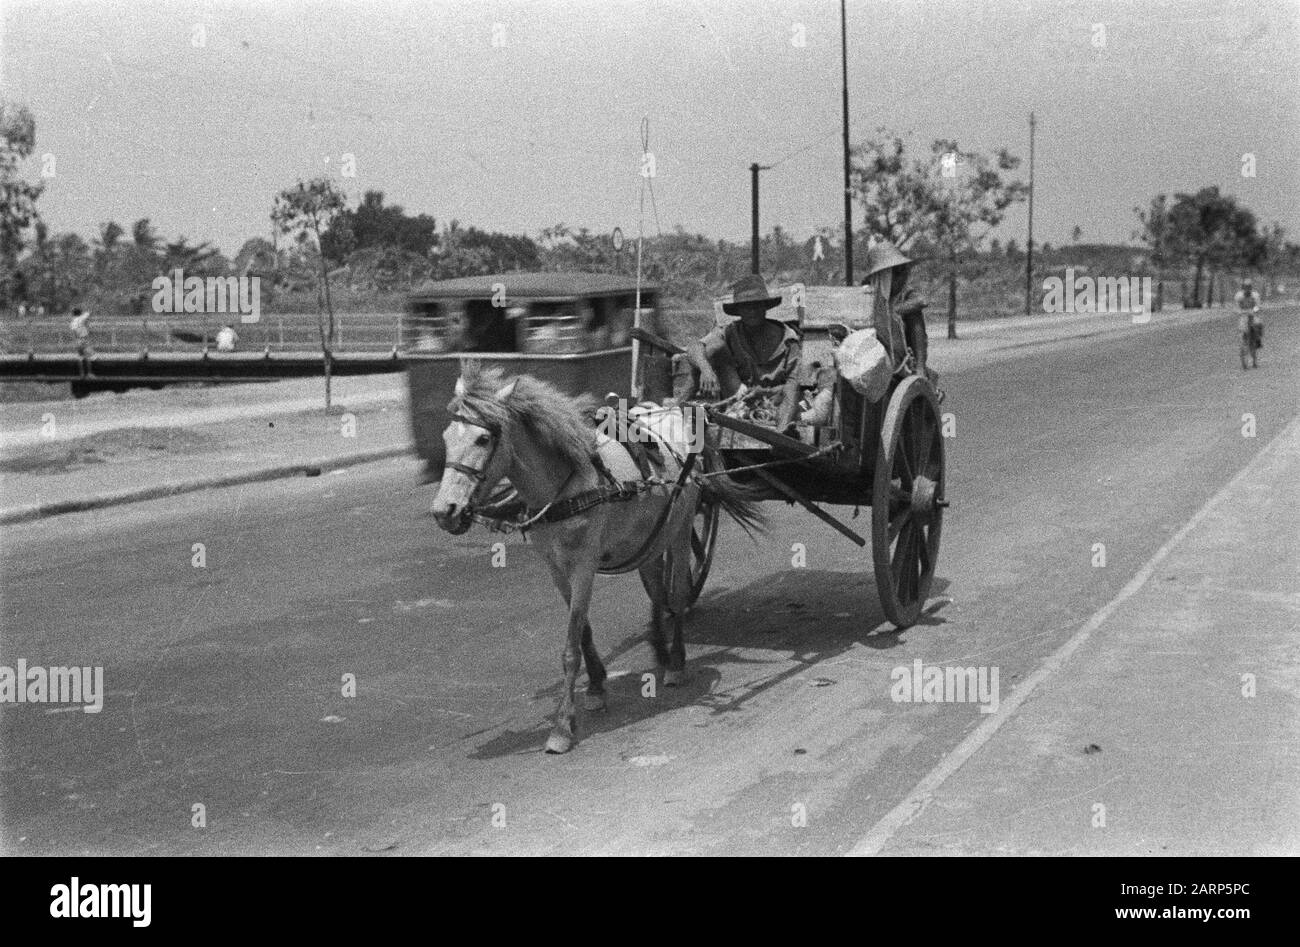 Dokar (horse and carriage) on a wide street Date: 1947/01/01 Location: Indonesia, Dutch East Indies Stock Photo